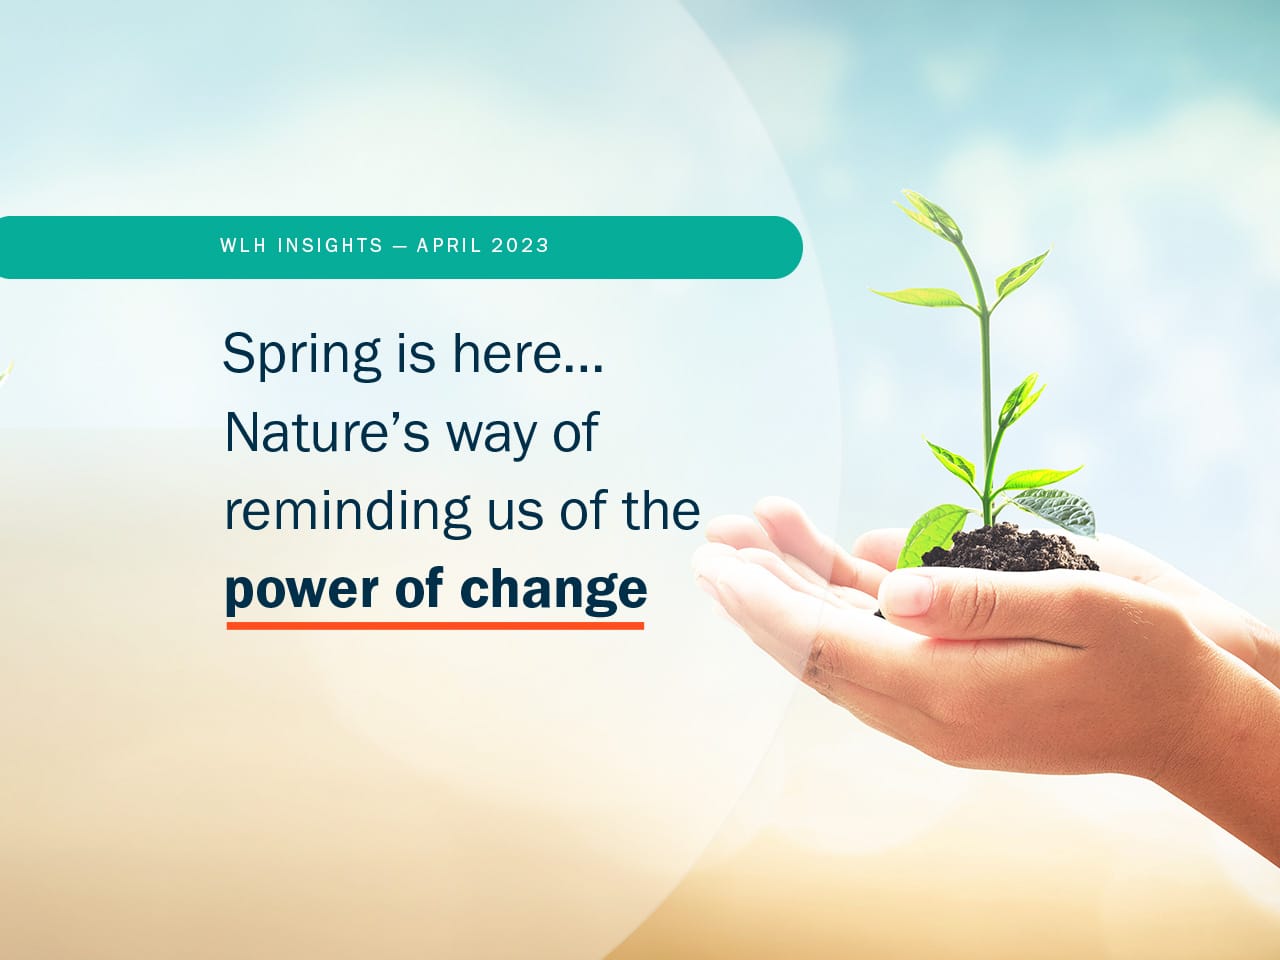 Spring is here… Nature’s way of reminding us of the power of change